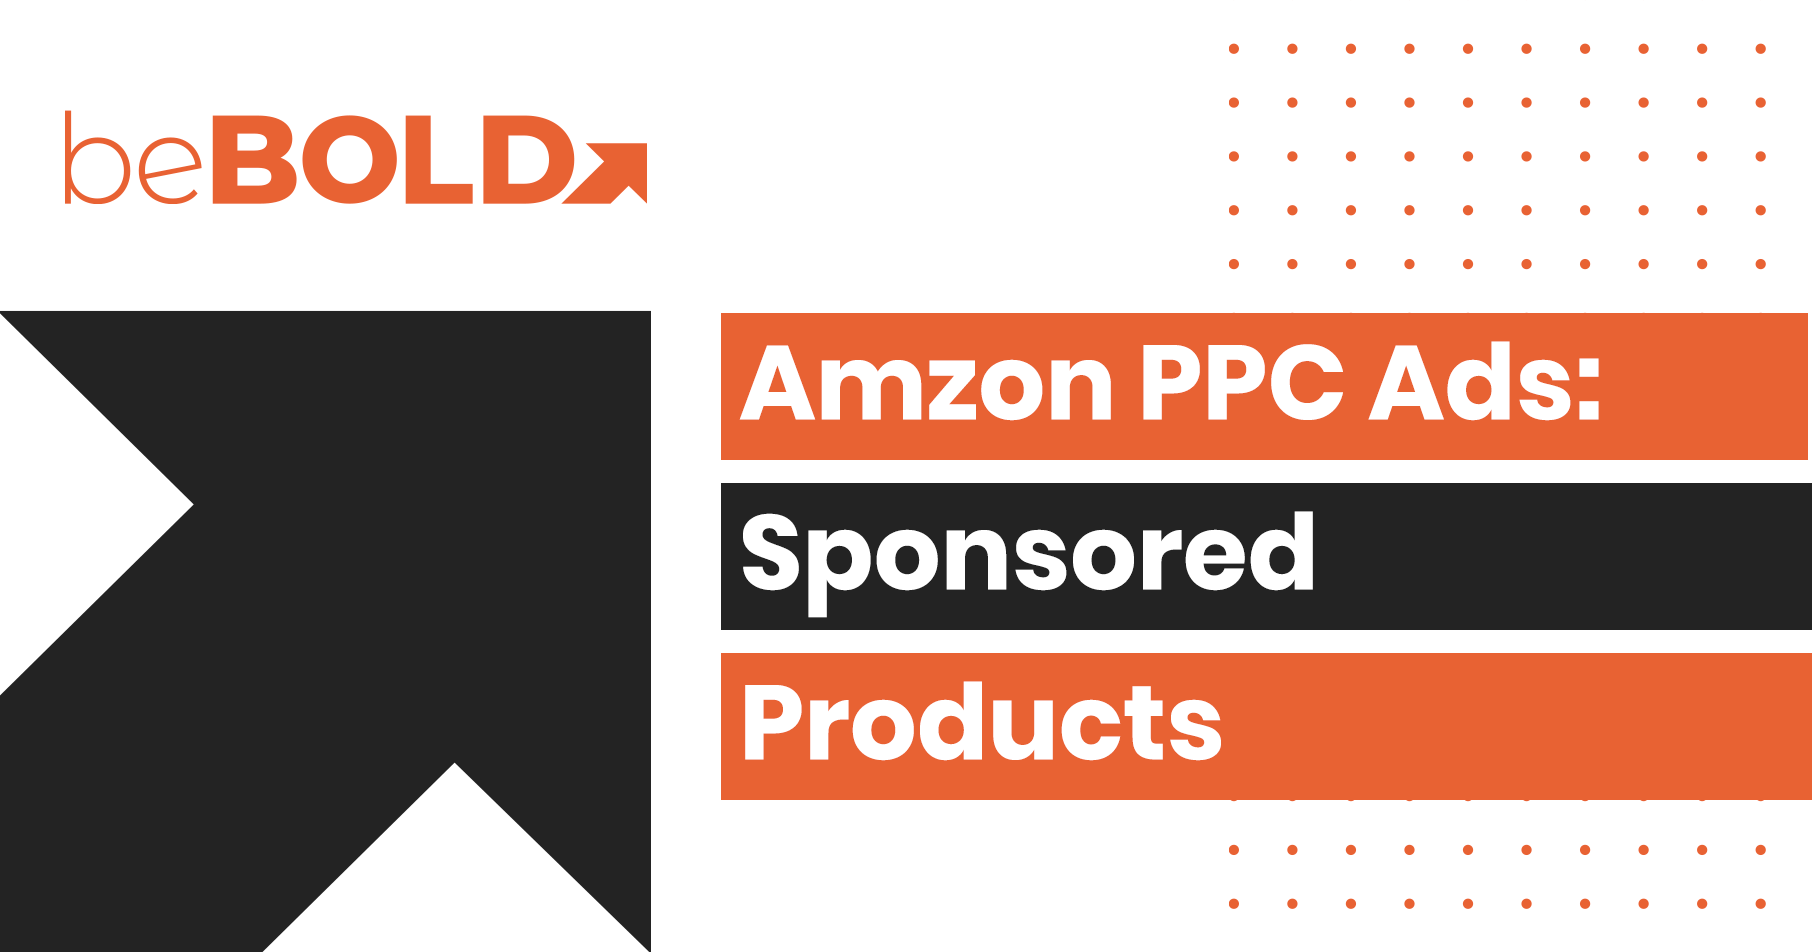 Amazon PPC Ads Sponsored Products